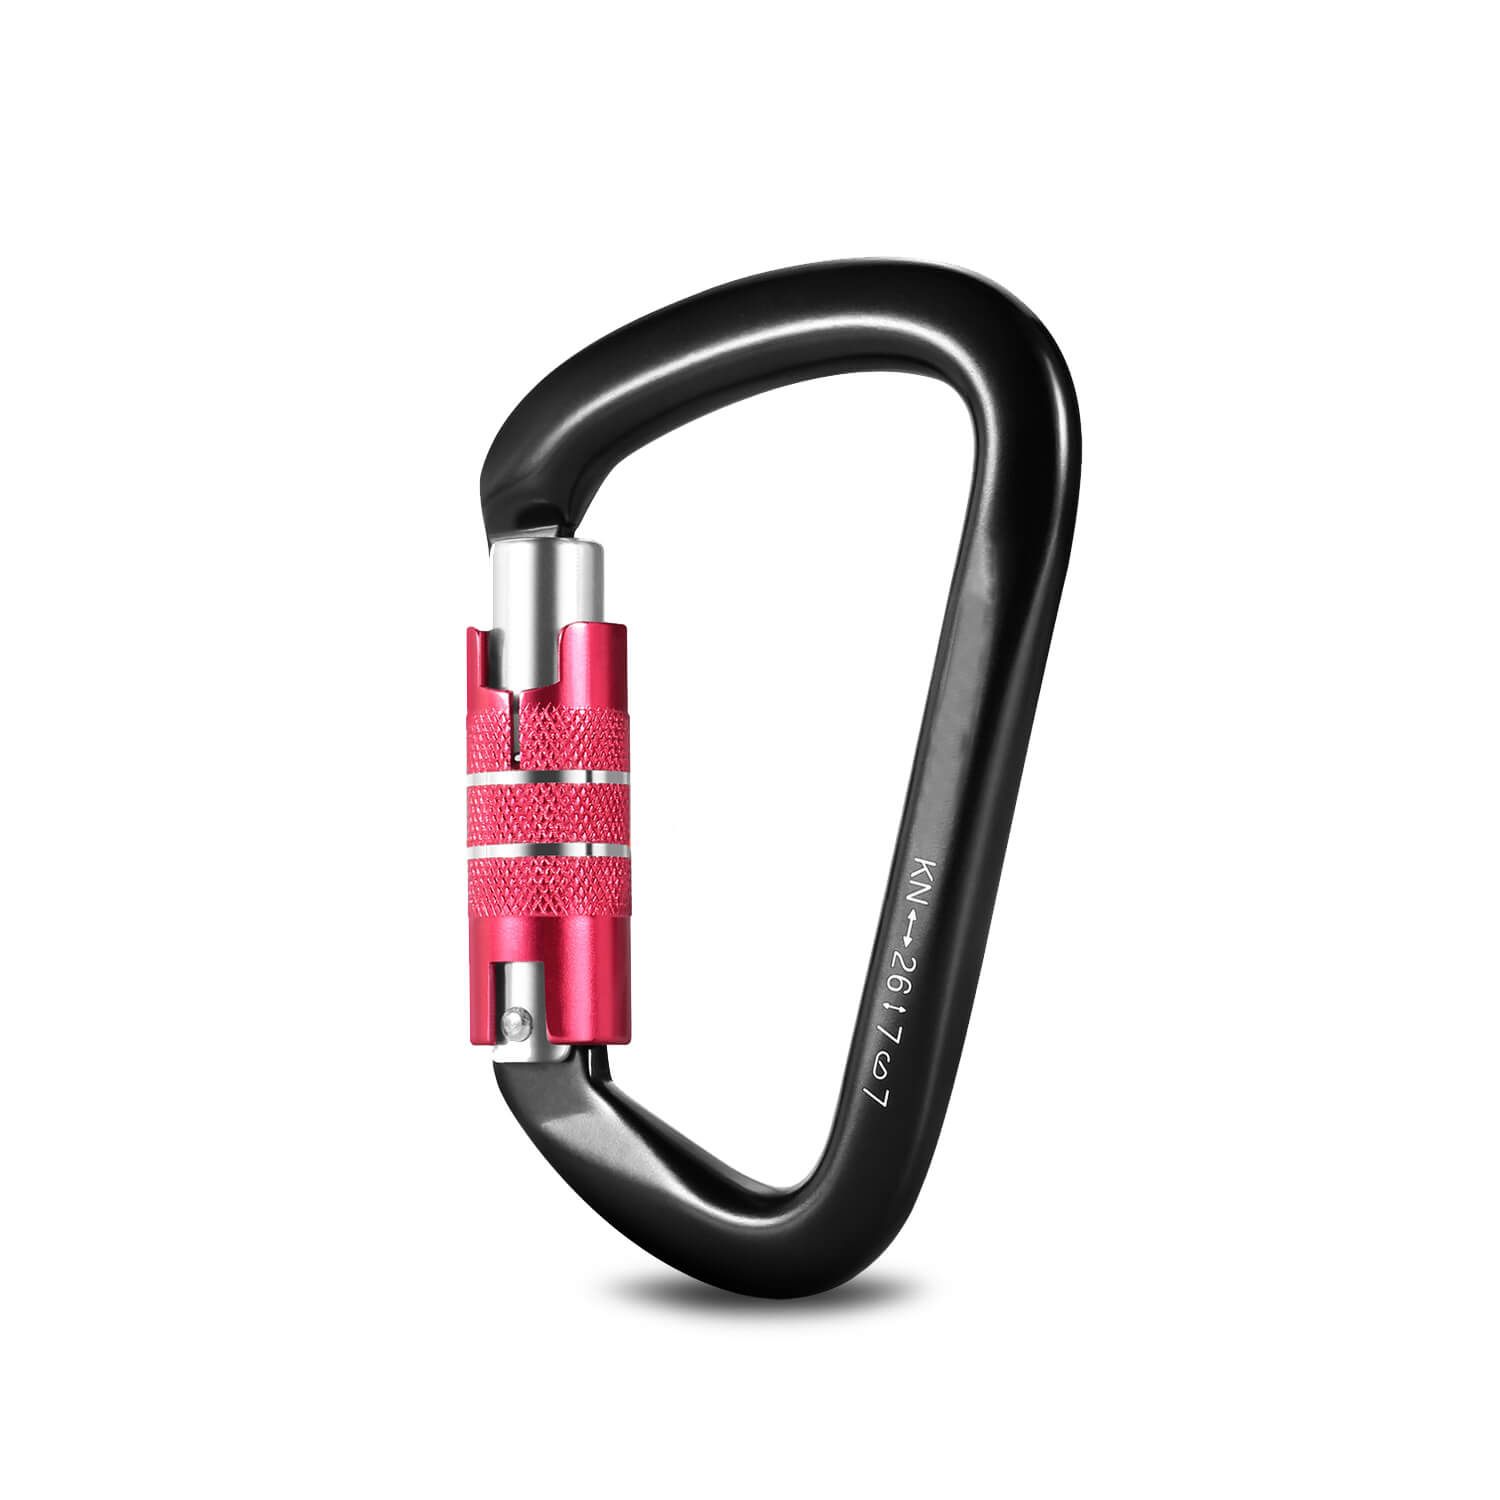 BEIFENG Auto Locking Carabiner 25KN Climbing Carabiner Large Carabiner Clip  Obtained UIAA Certification Heavy Duty Carabiners Suitable for Rock  Climbing, Camping, Gym,Rescue Black Black & silver4Pcs